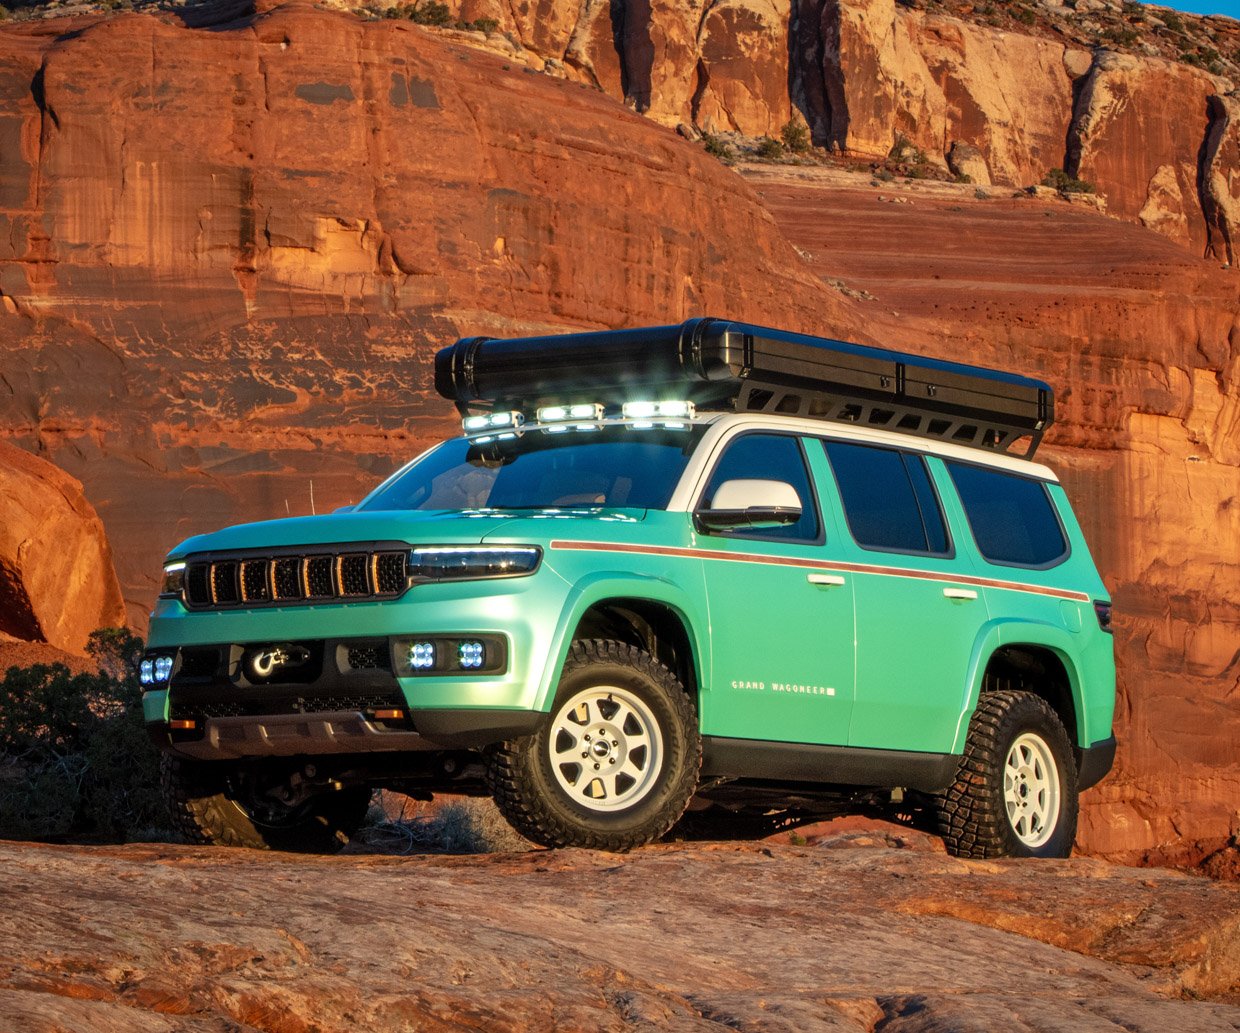 Jeep Vacationeer Concept Overlands Its Way to the Easter Jeep Safari